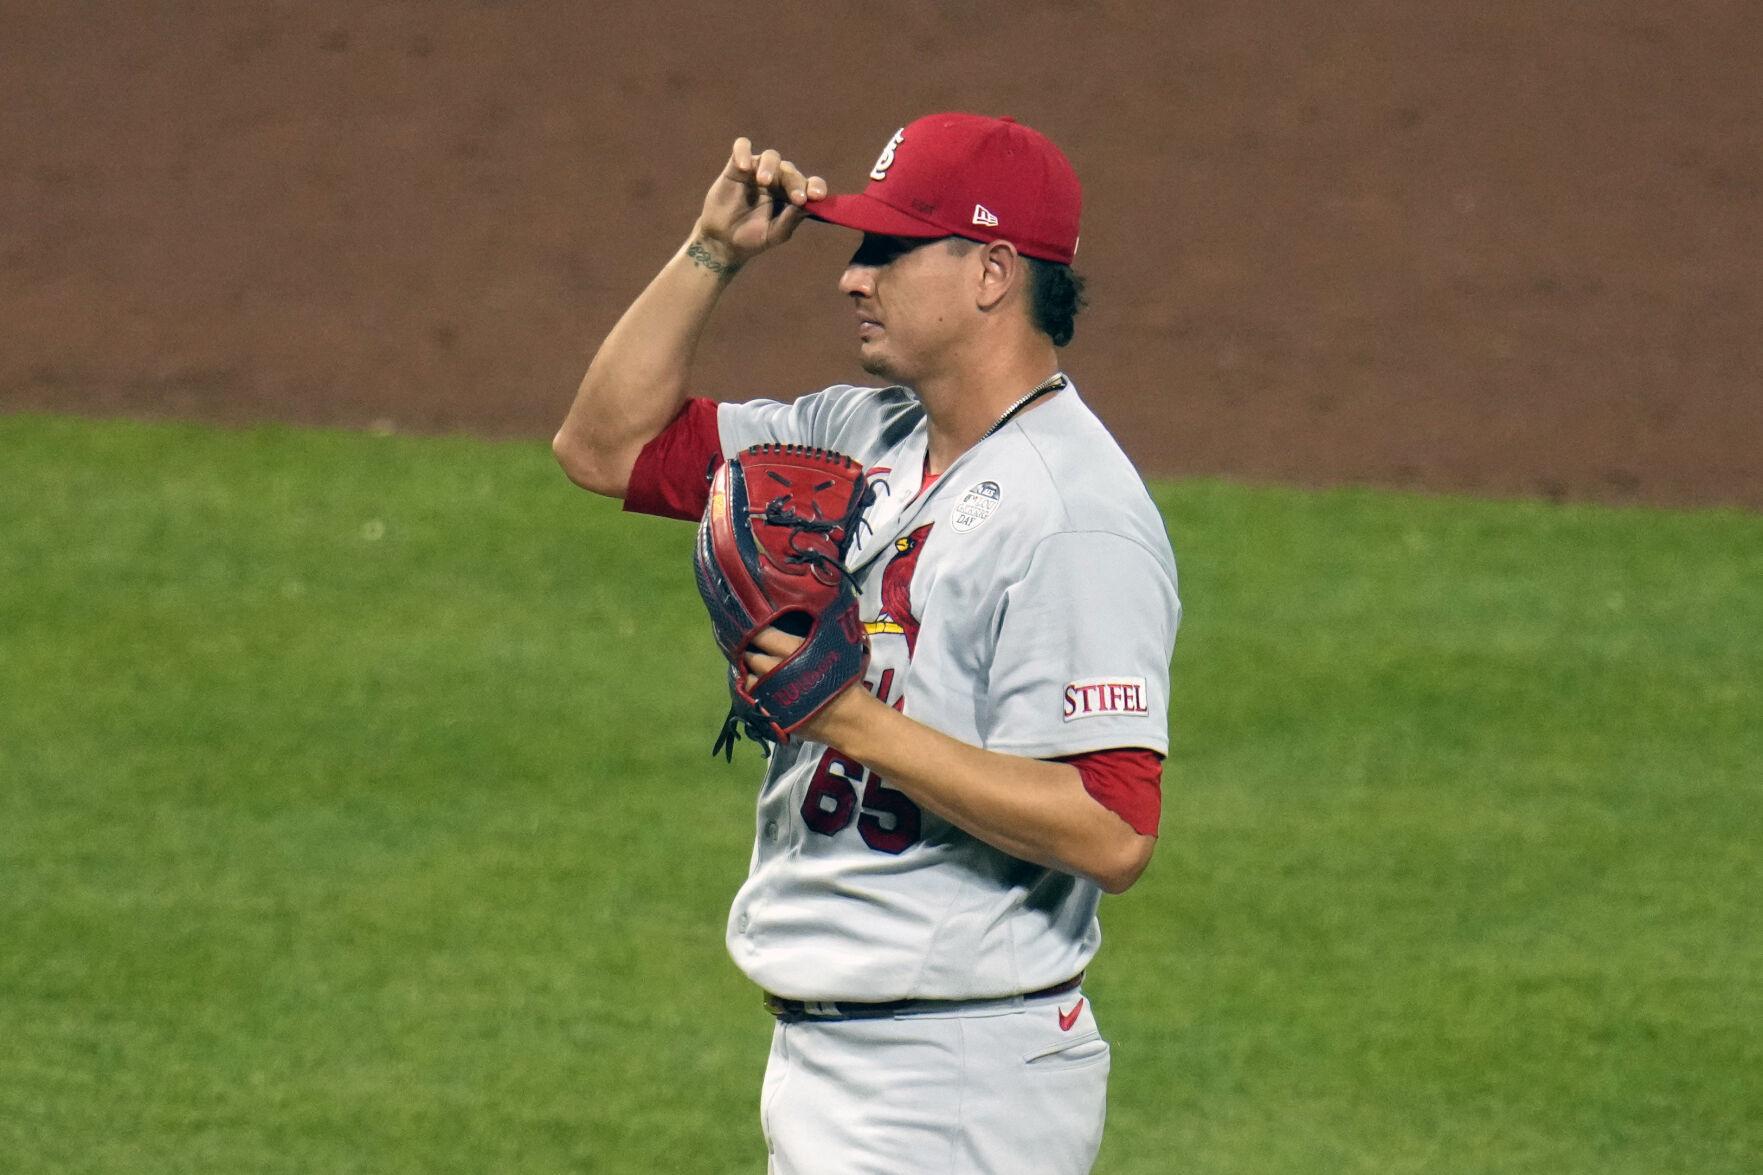 Steal city: How 3 missed chances, 2 stolen bases added up to 1 meltdown for Cardinals